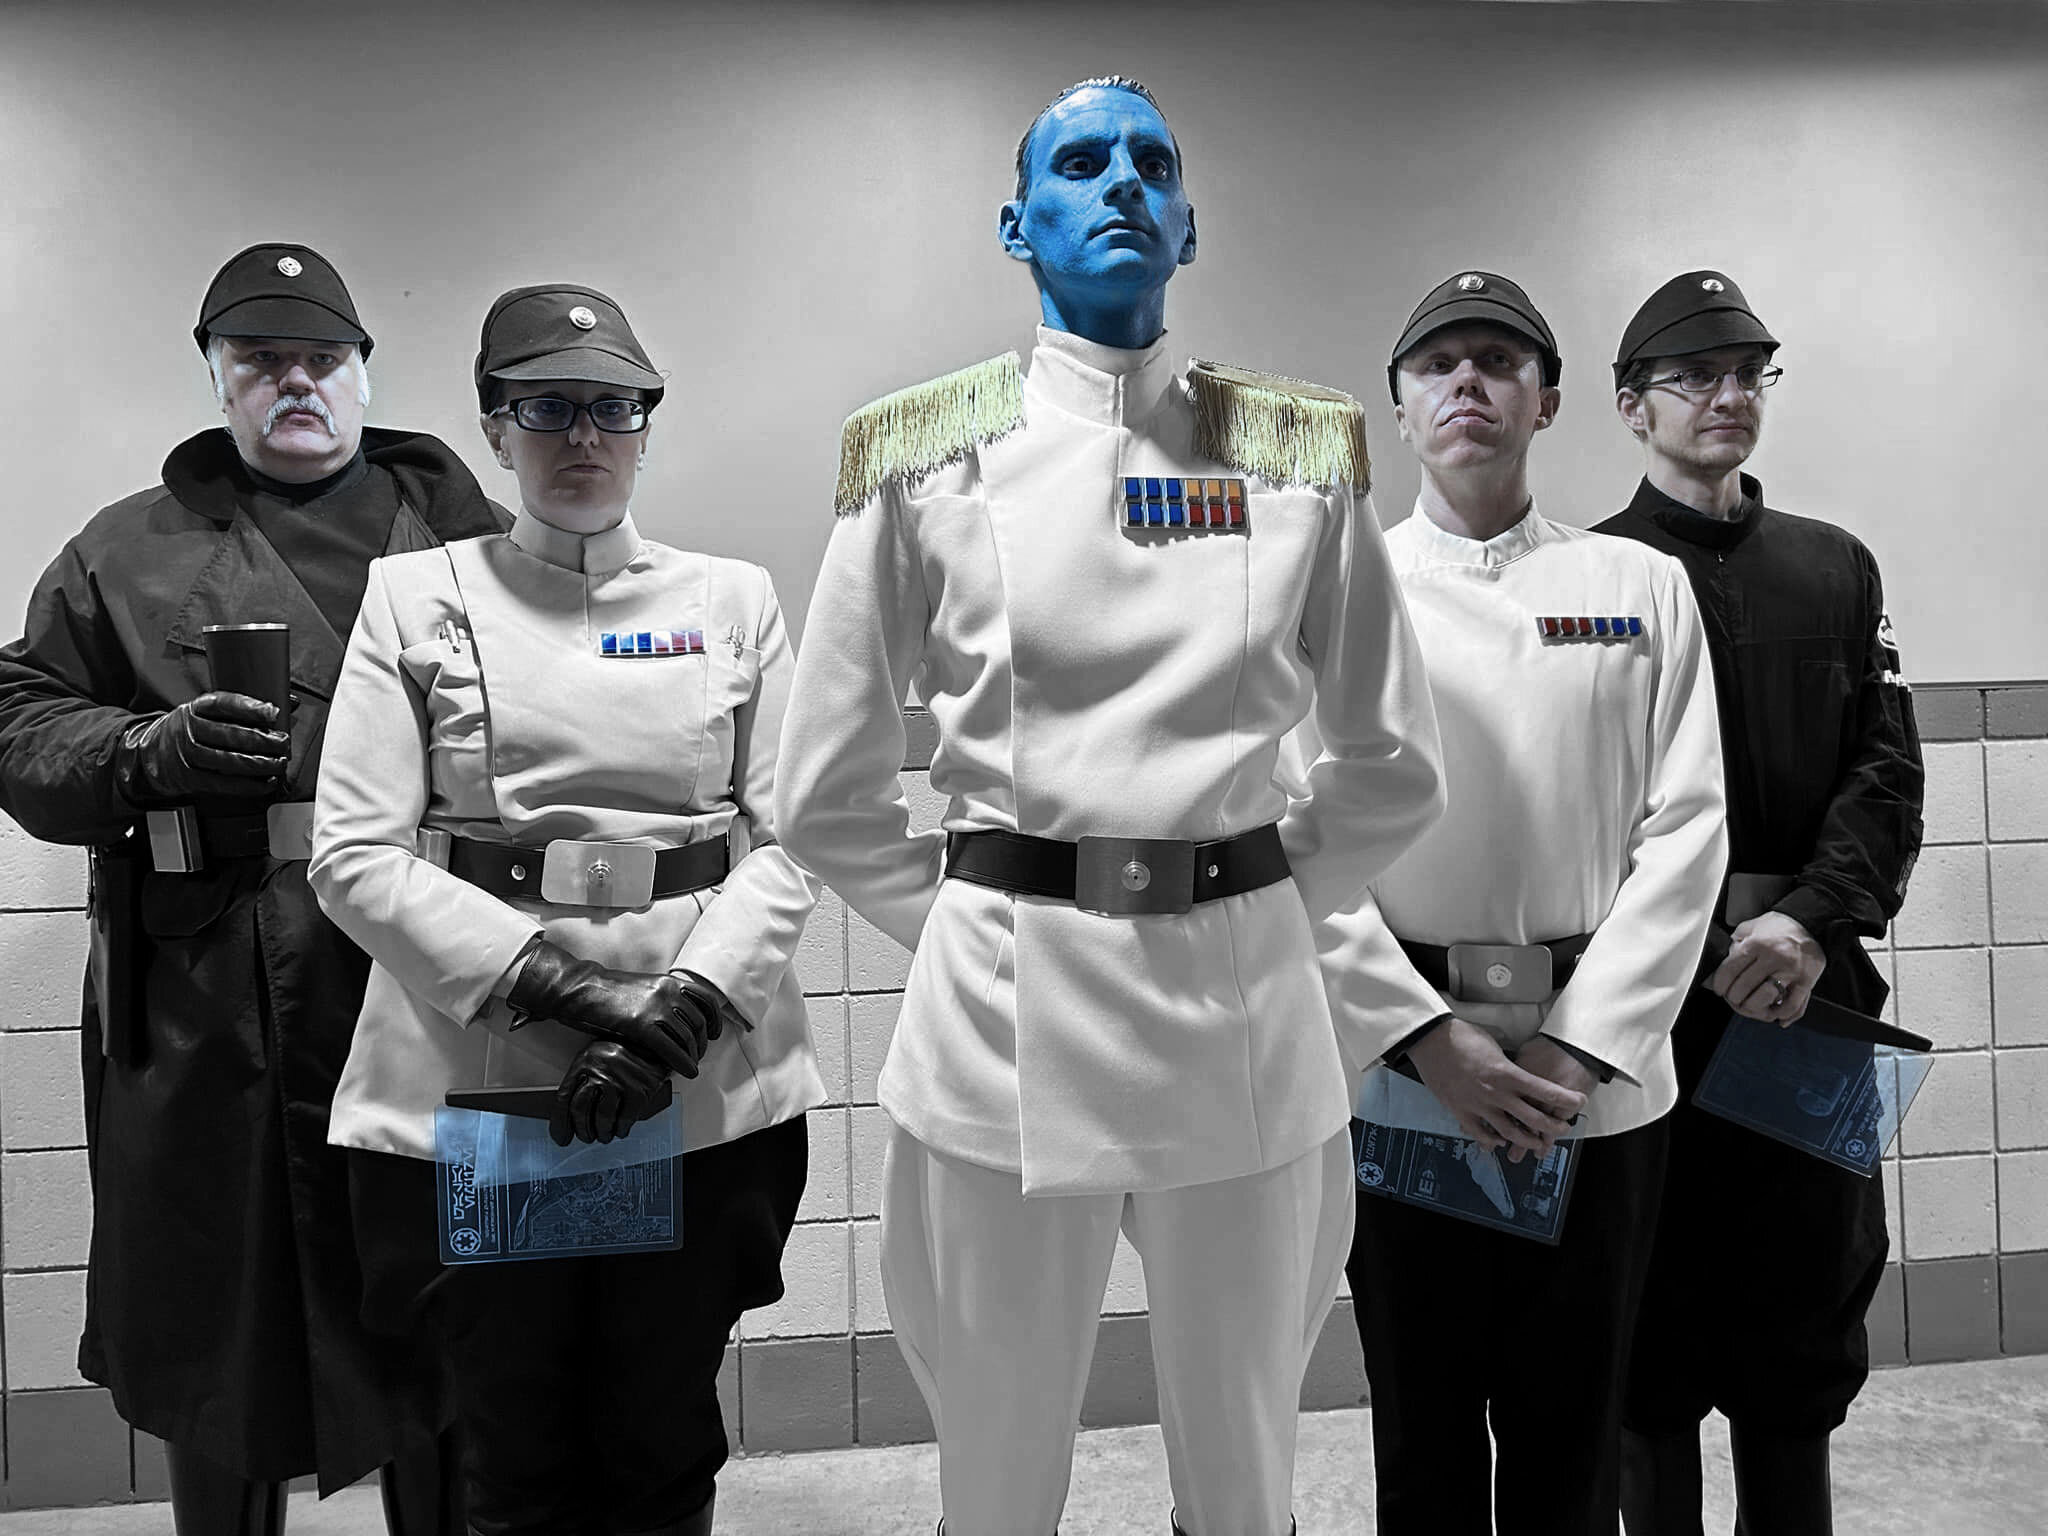 &ldquo;War is primarily a game of skill. It is a contest of mind matched against mind, tactics matched against tactics.&rdquo; - Grand Admiral Thrawn 

Imperial Officers from the @[17841406225184654:@501st_starkillergarrison] and @[17841403004641705: